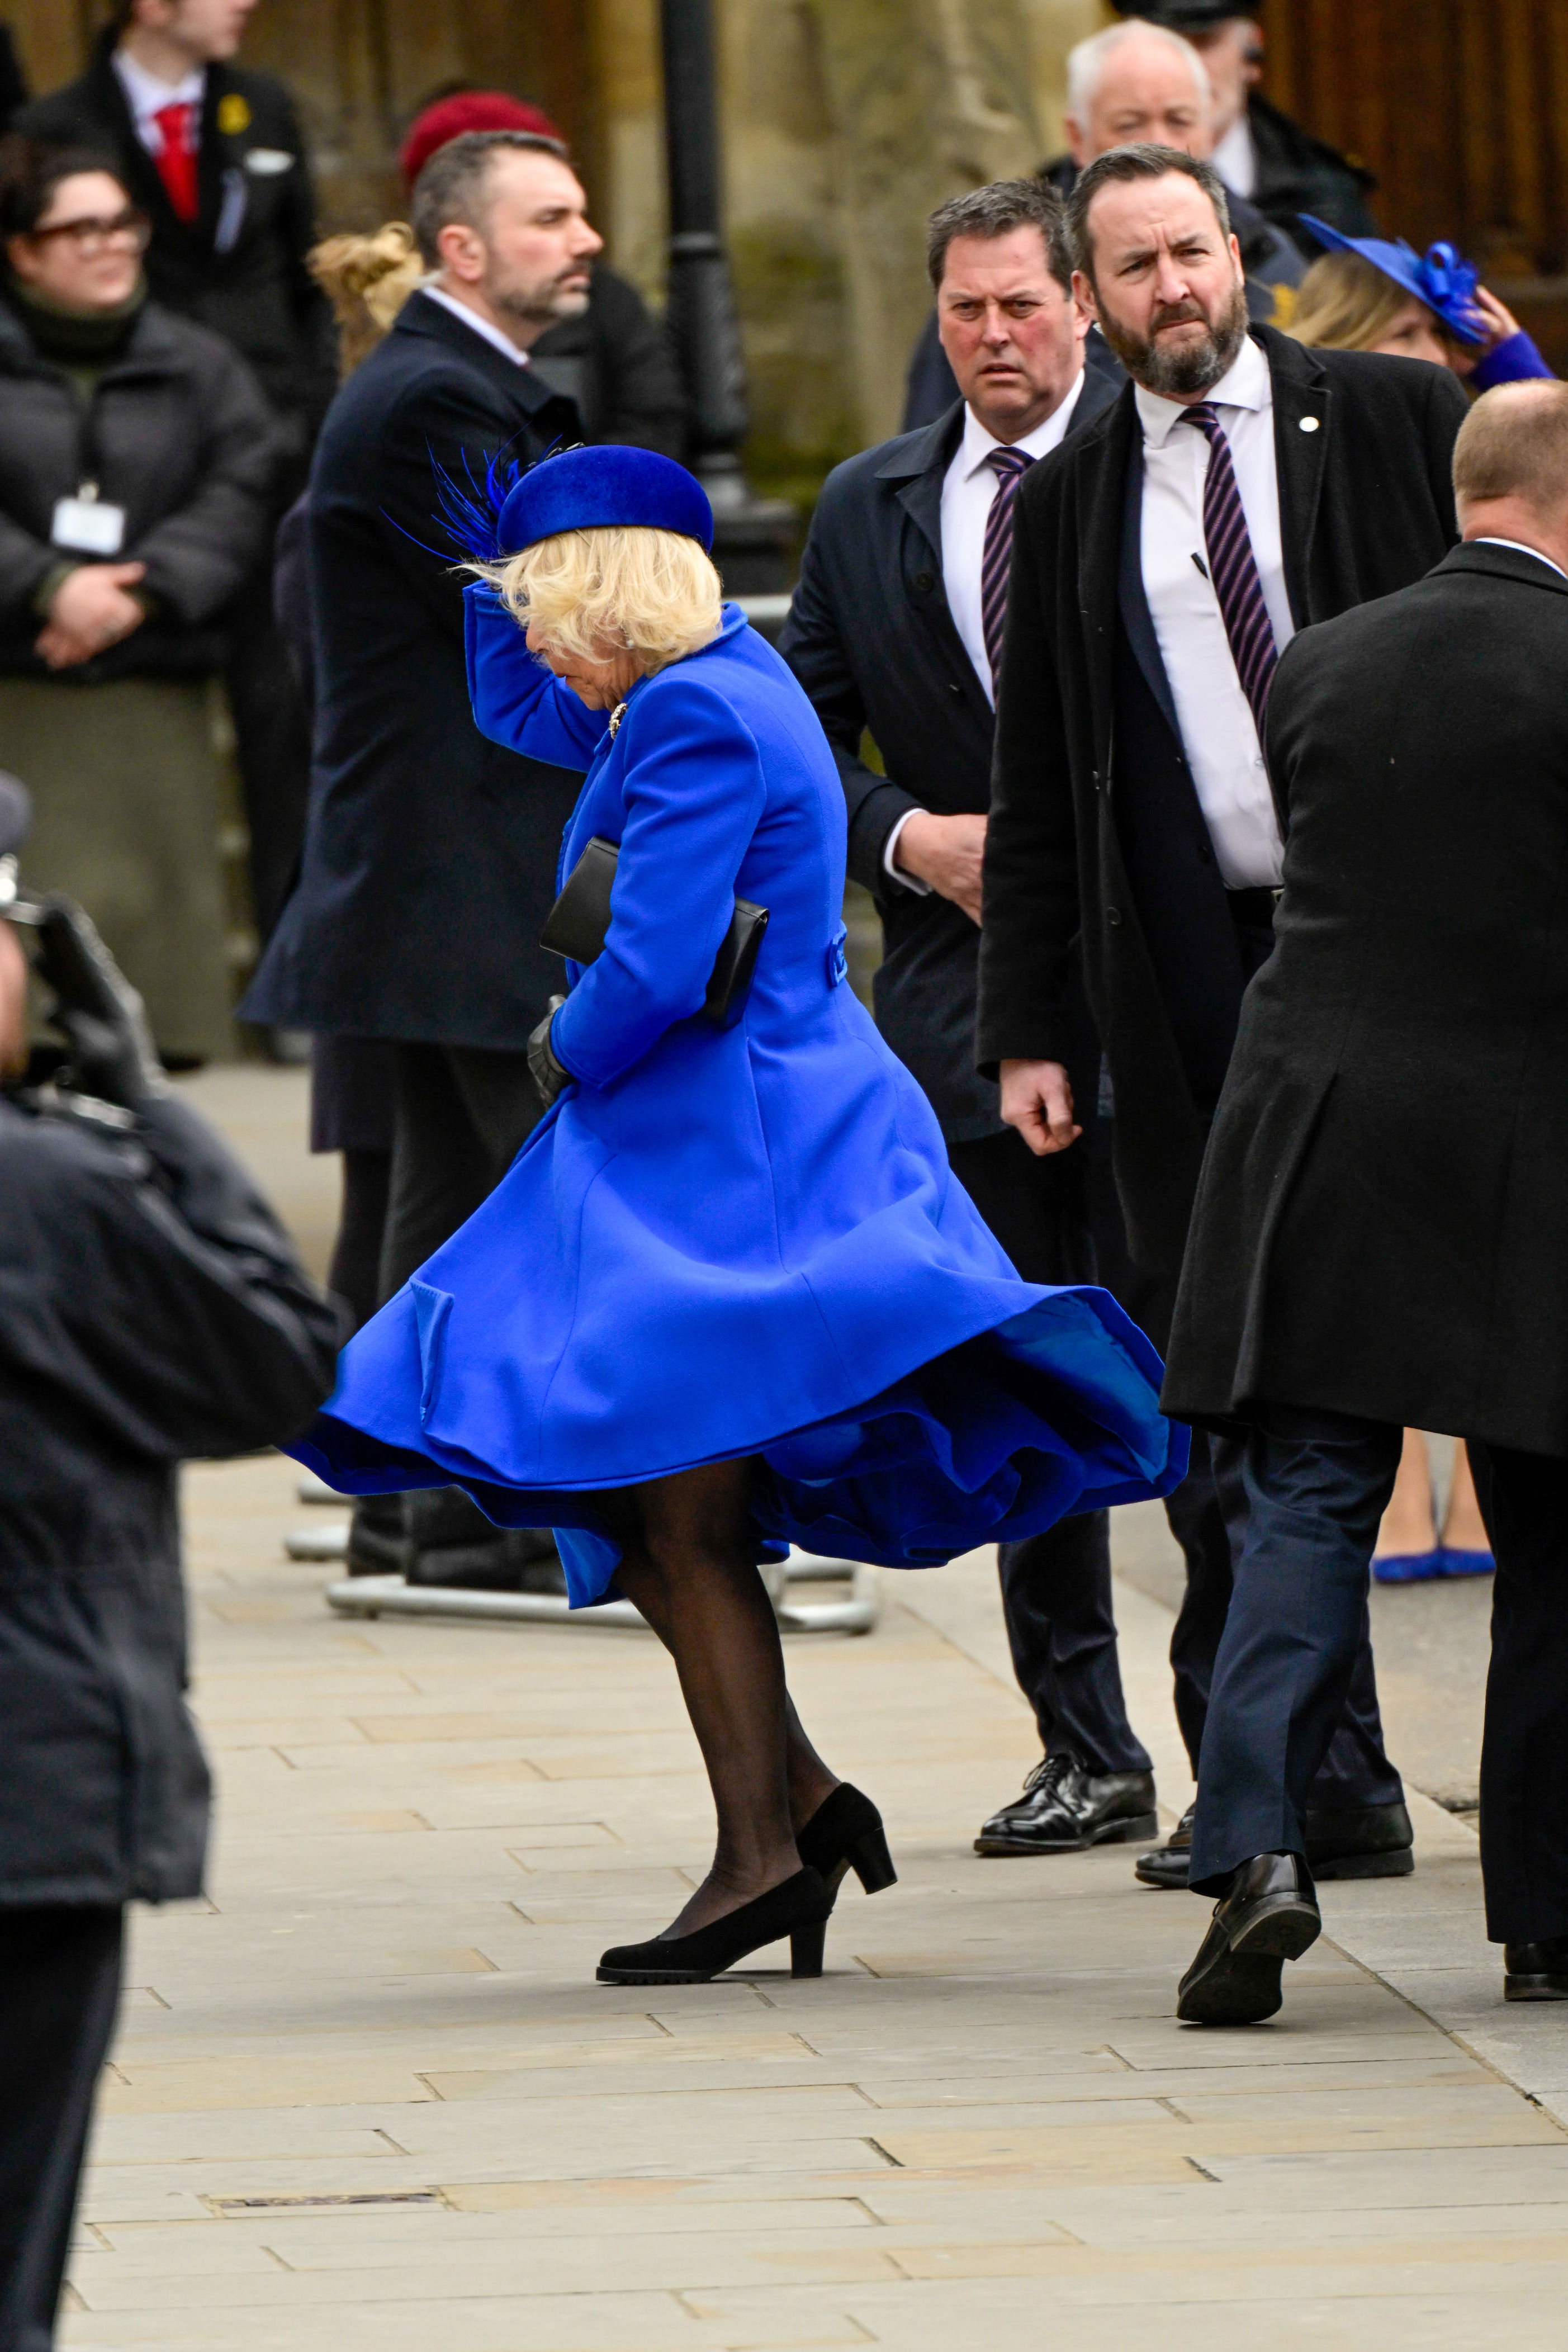 <p>Queen Consort Camilla battled a gust of wind as she arrived at the annual Commonwealth Day Service at Westminster Abbey in London on March 13, 2022 -- the first of husband King Charles III's reign.</p>